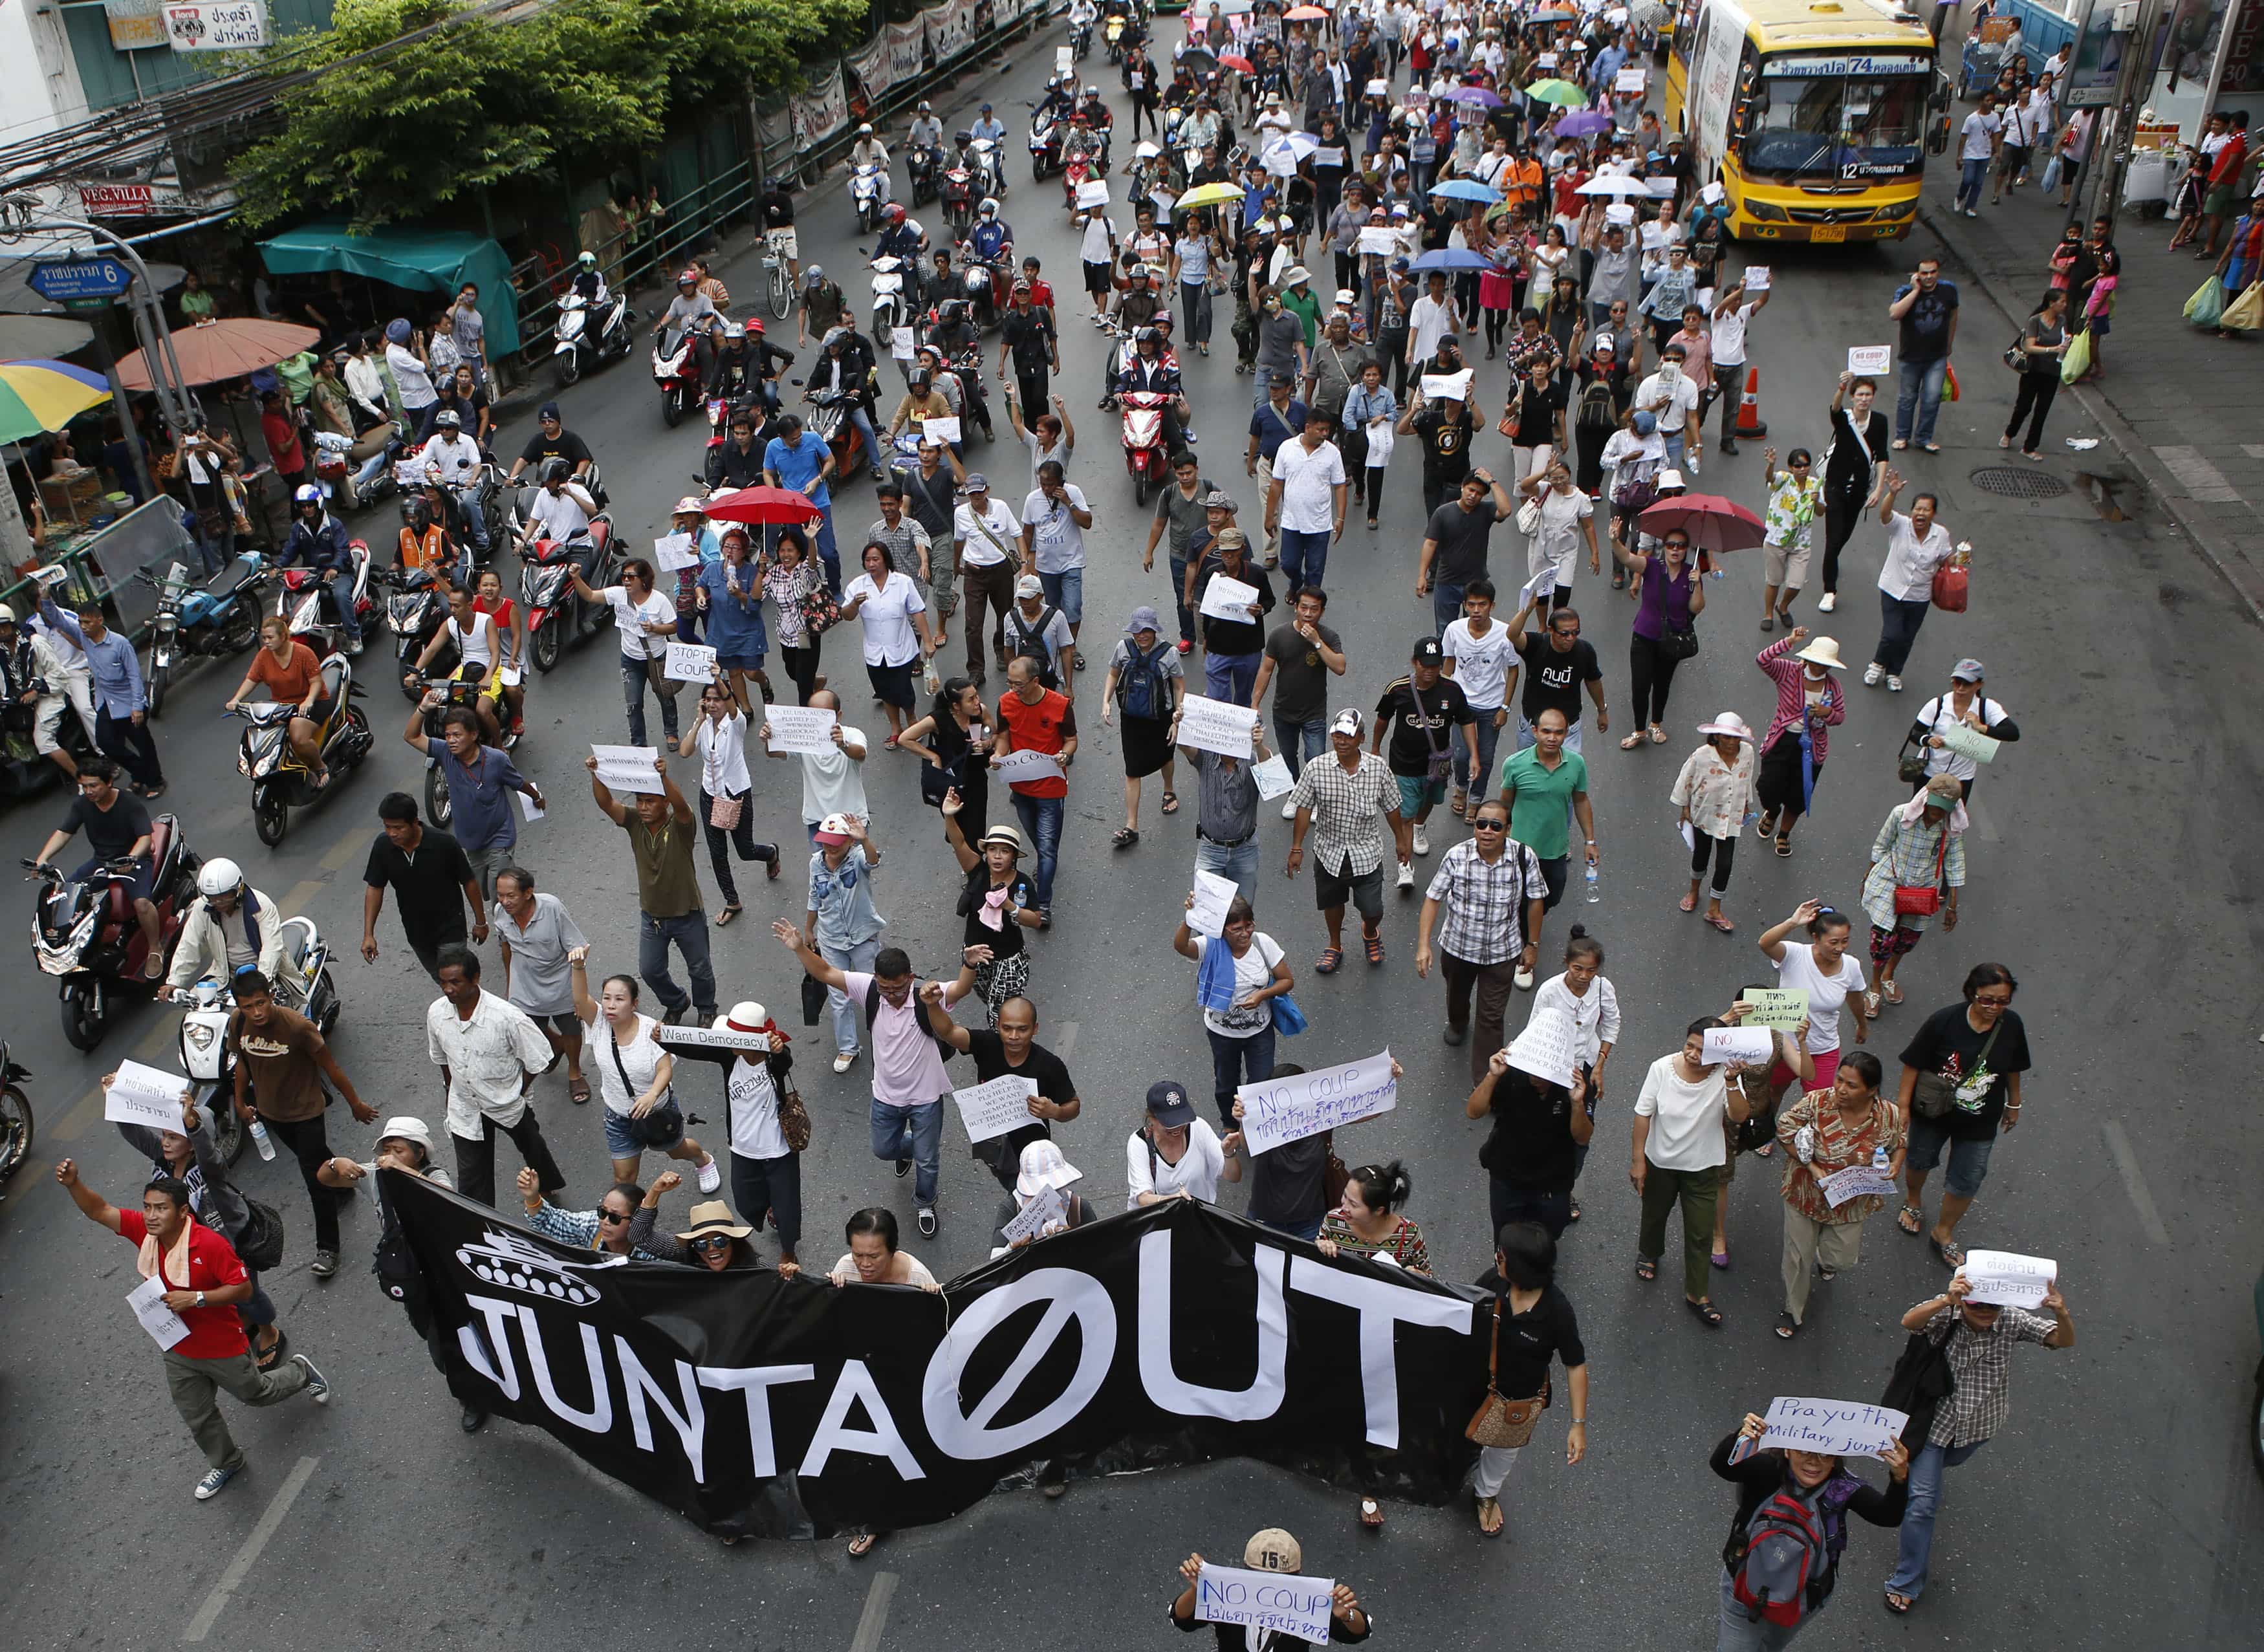 Demonstrators against military rule march towards the Victory Monument in Bangkok on 25 May 2014, REUTERS/Erik De Castro